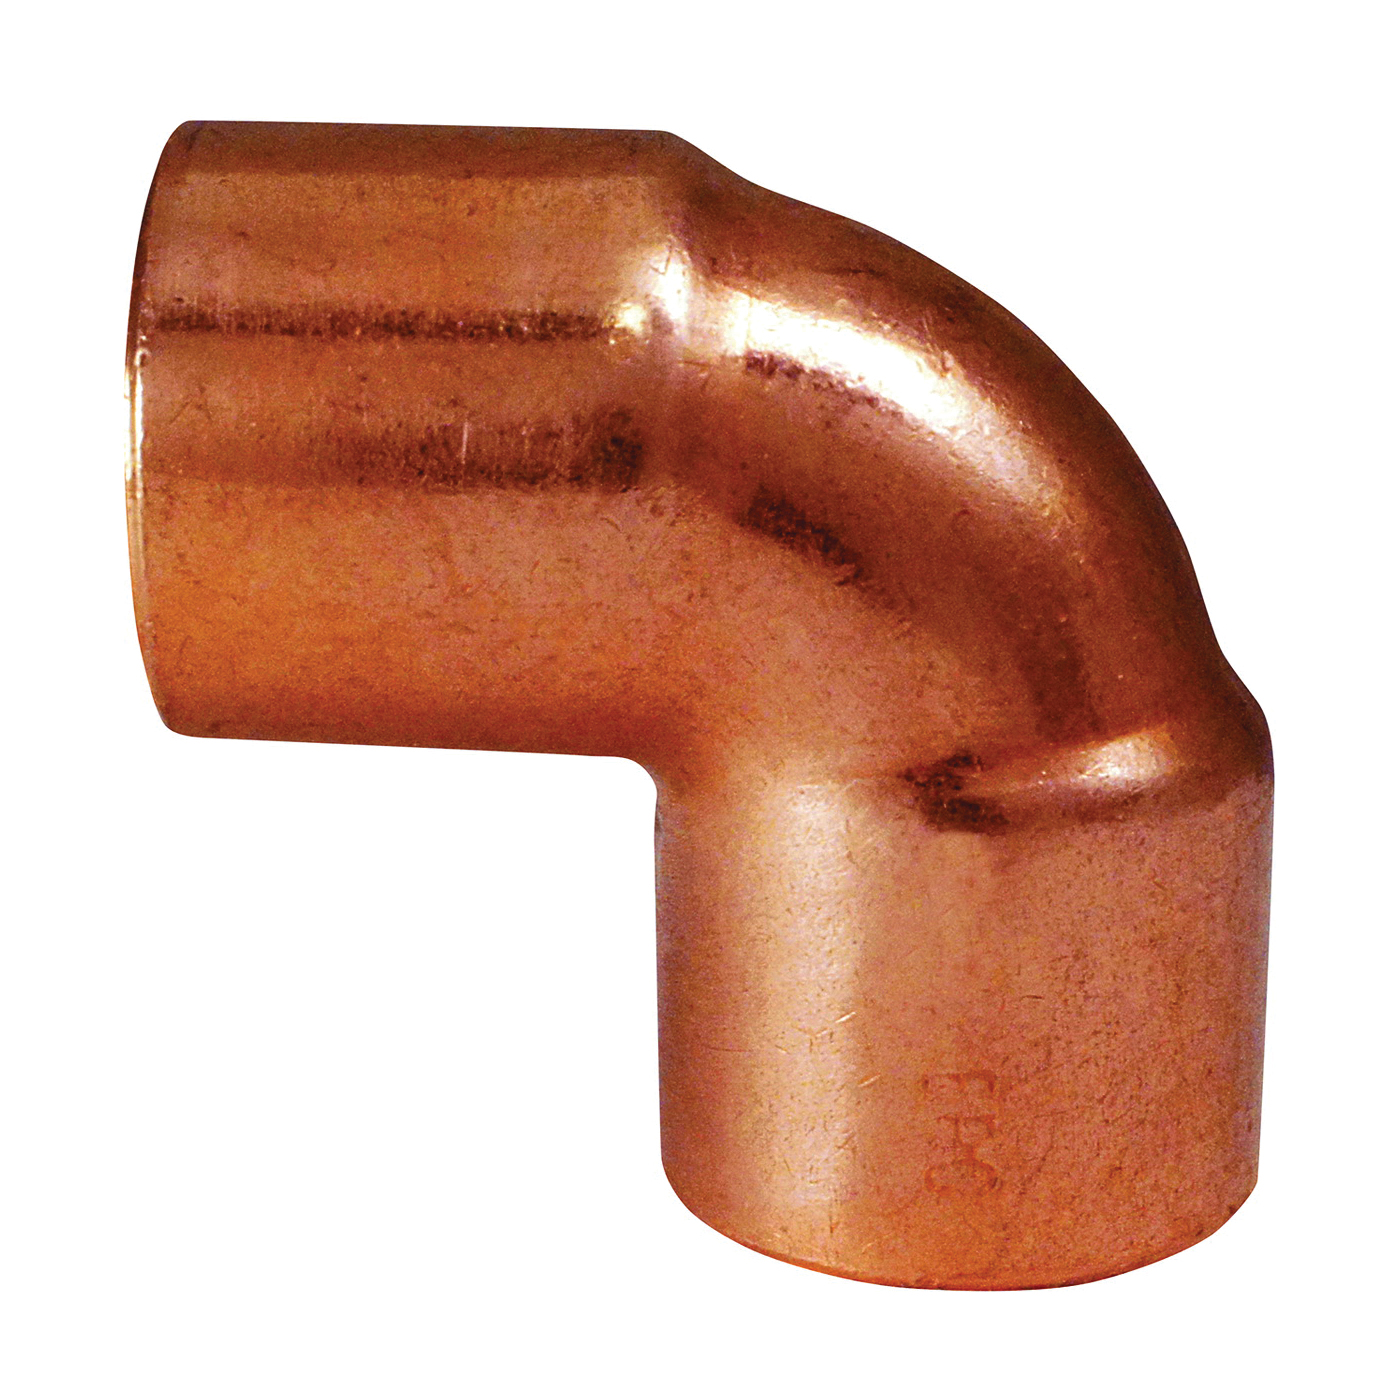 Elkhart Products 31296 Pipe Elbow, 1 in, Sweat, 90 deg Angle, Copper - 1